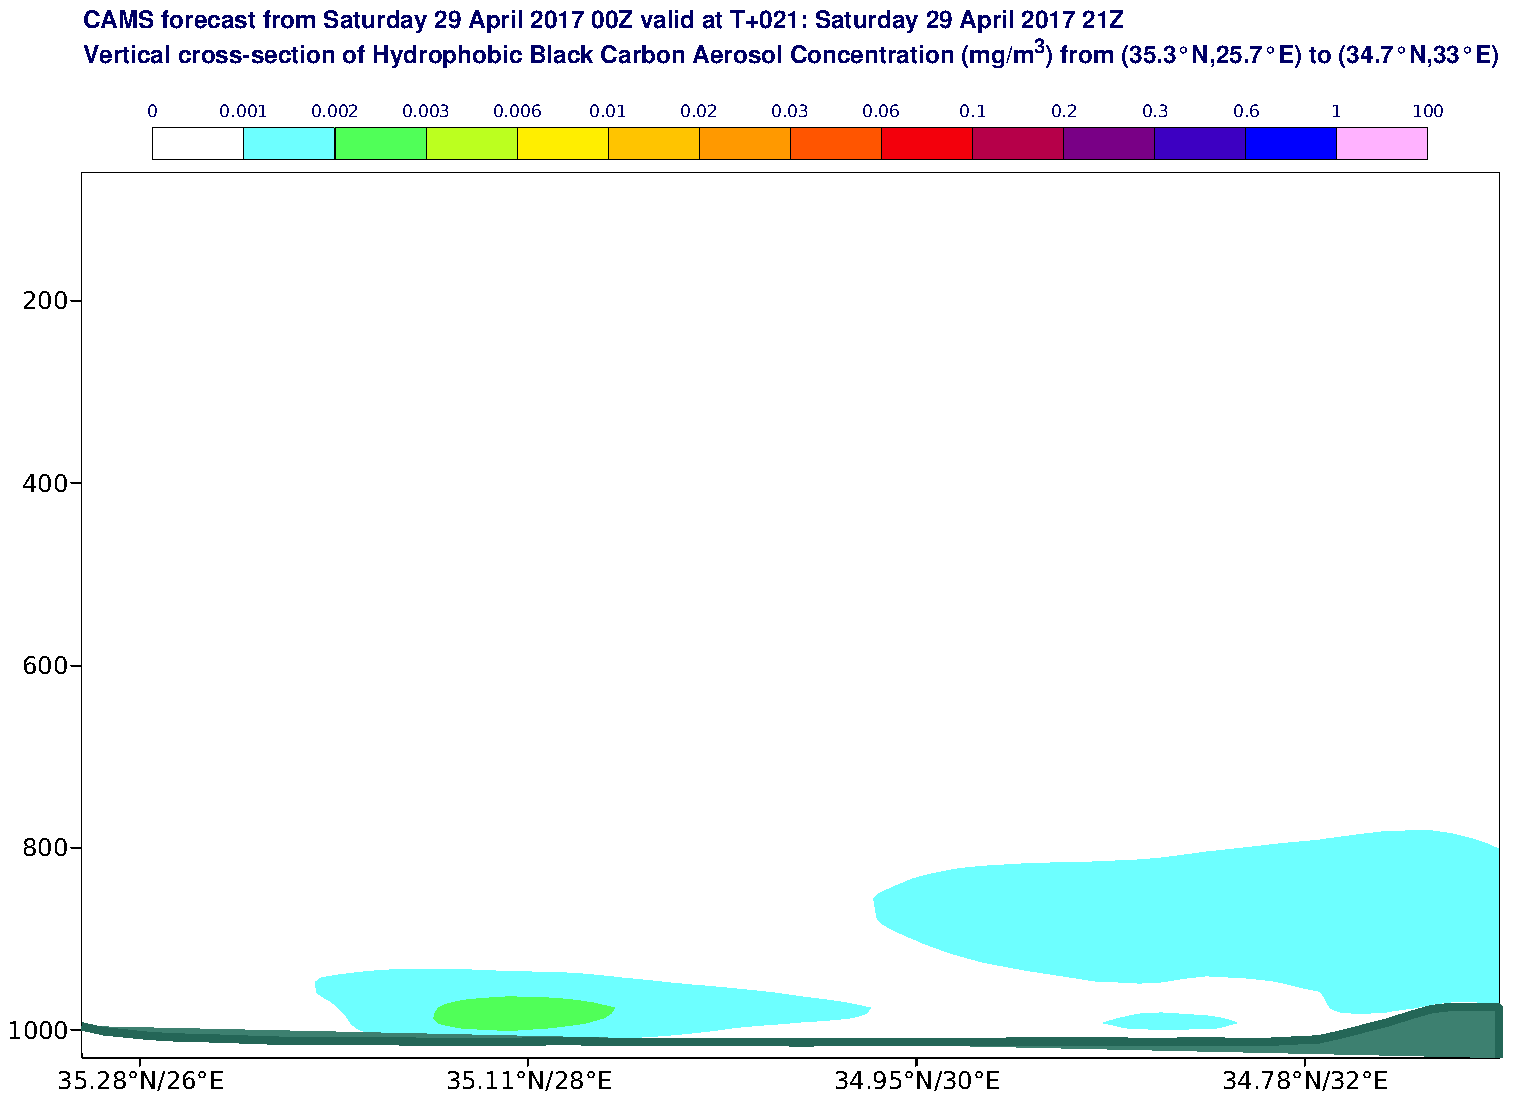 Vertical cross-section of Hydrophobic Black Carbon Aerosol Concentration (mg/m3) valid at T21 - 2017-04-29 21:00